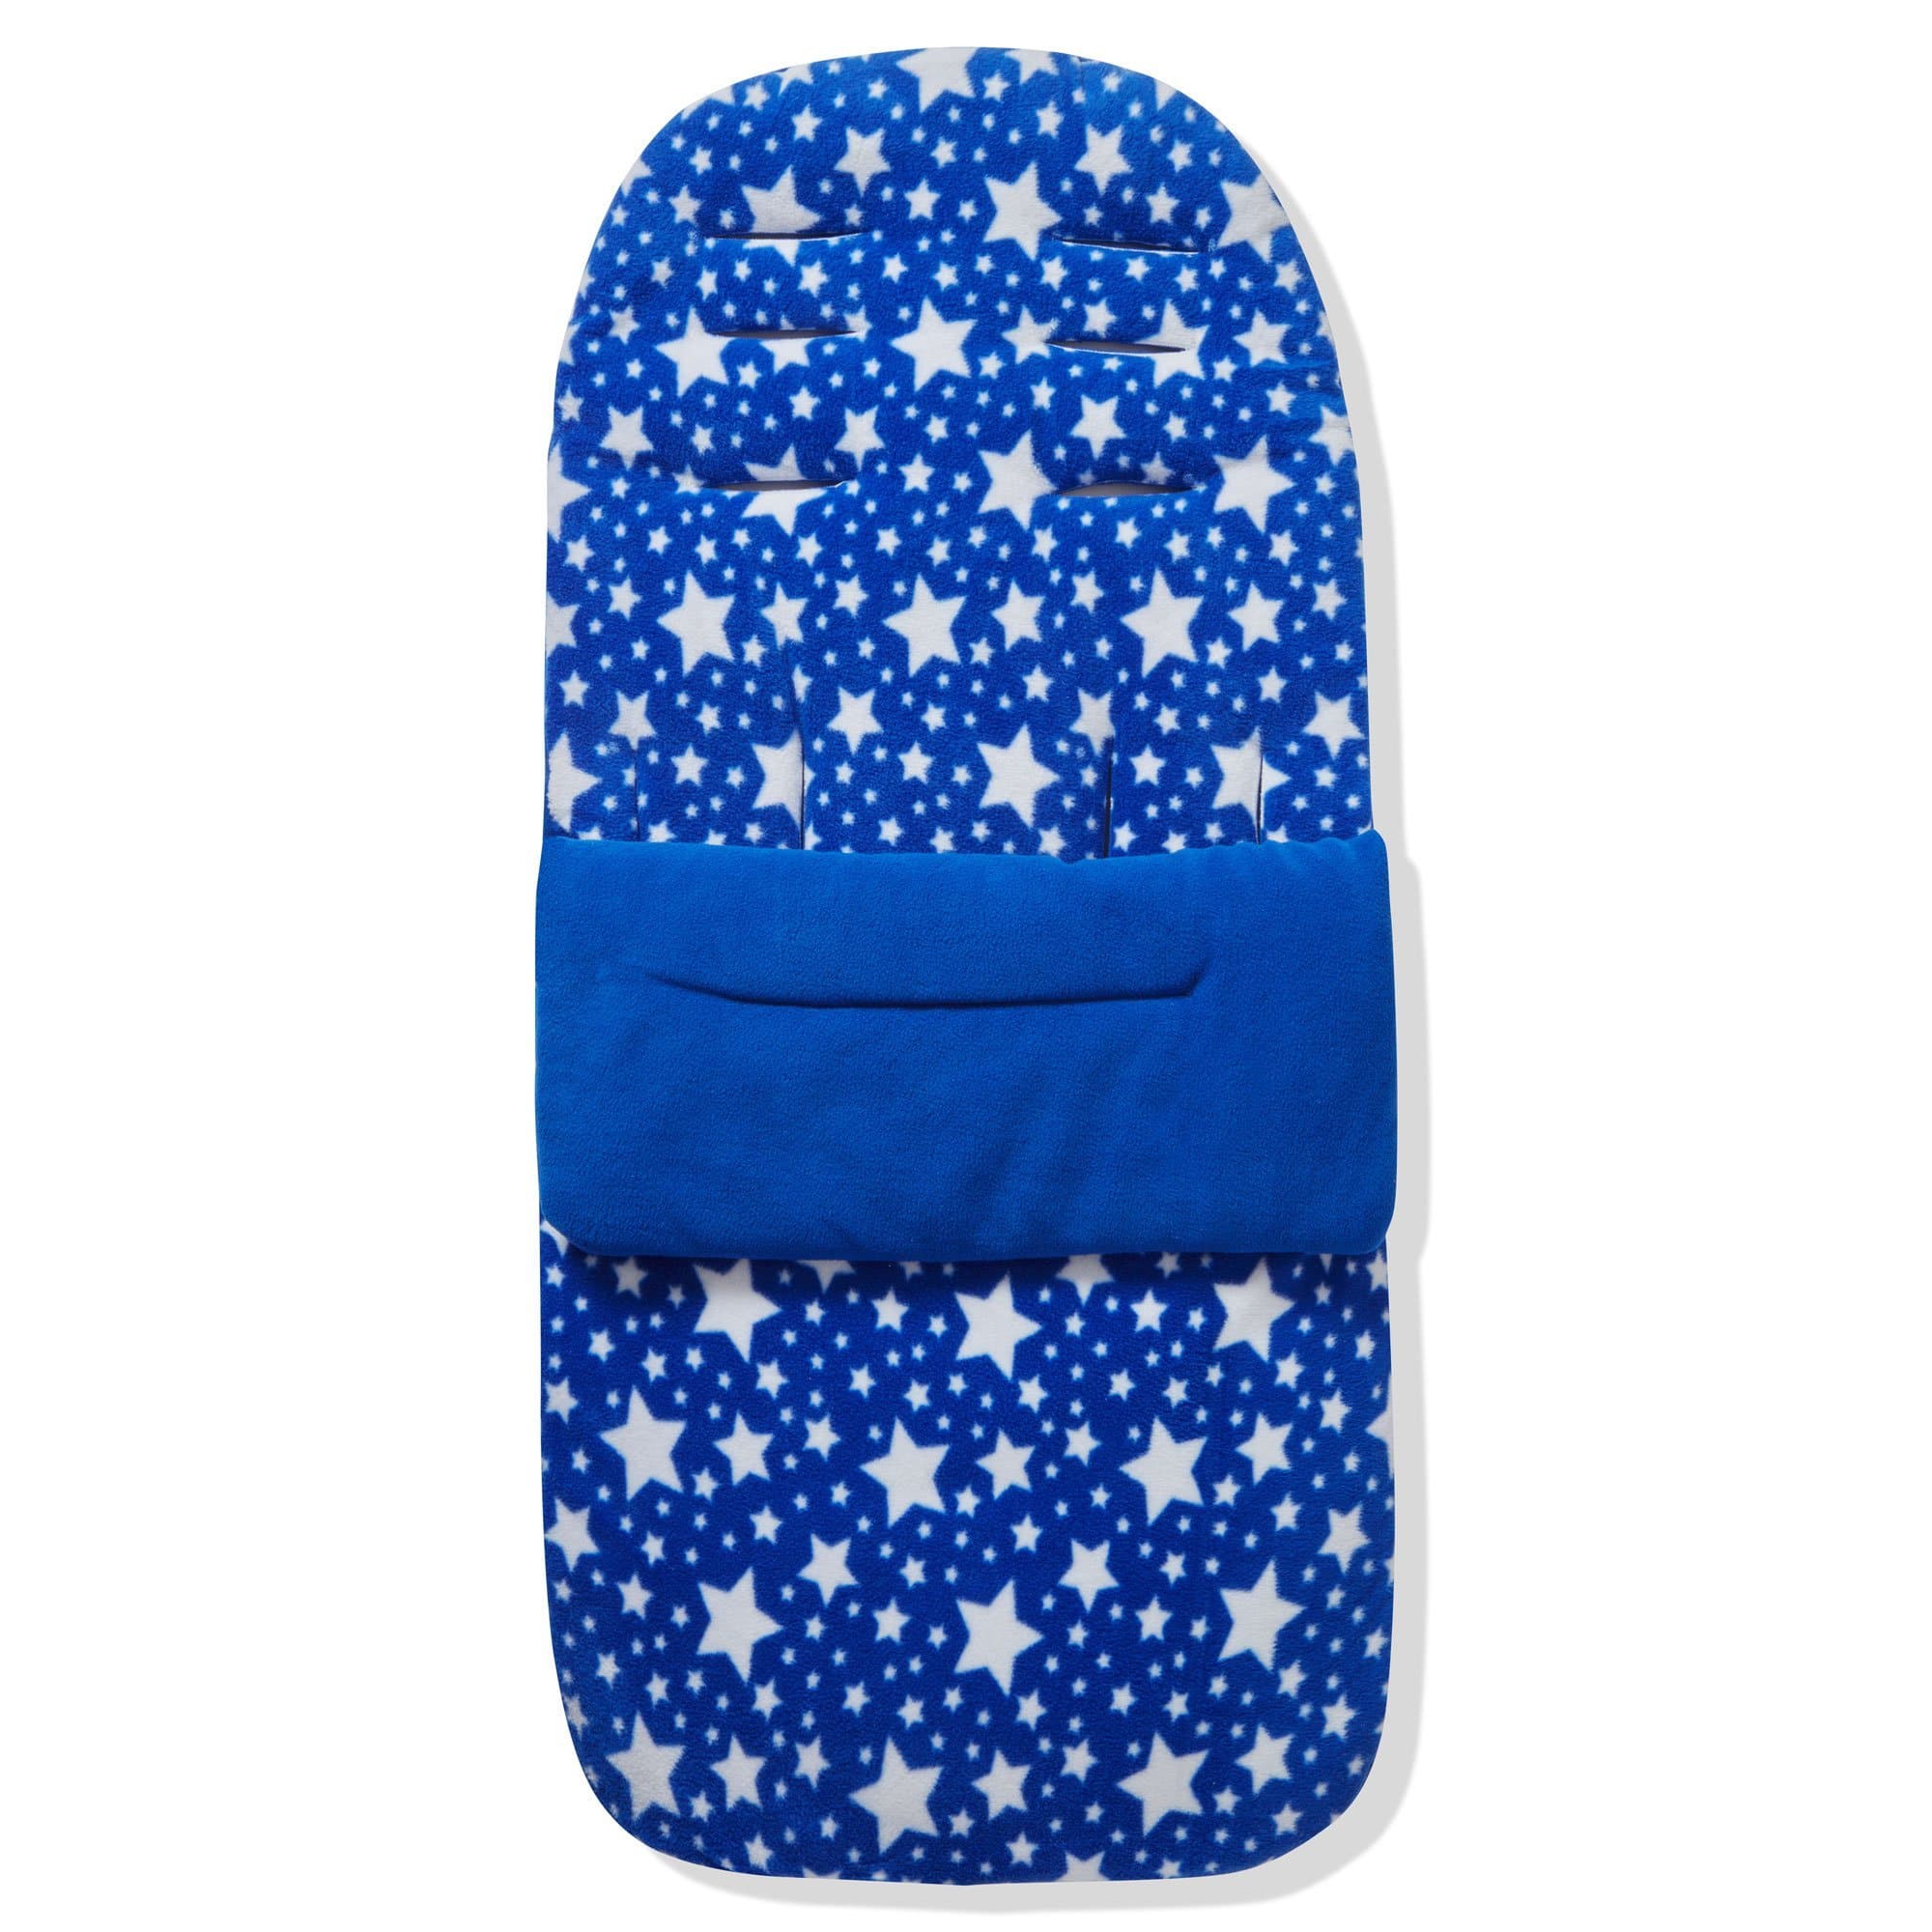 Fleece Footmuff / Cosy Toes Compatible With Bebe Confort - Blue Star / Fits All Models | For Your Little One